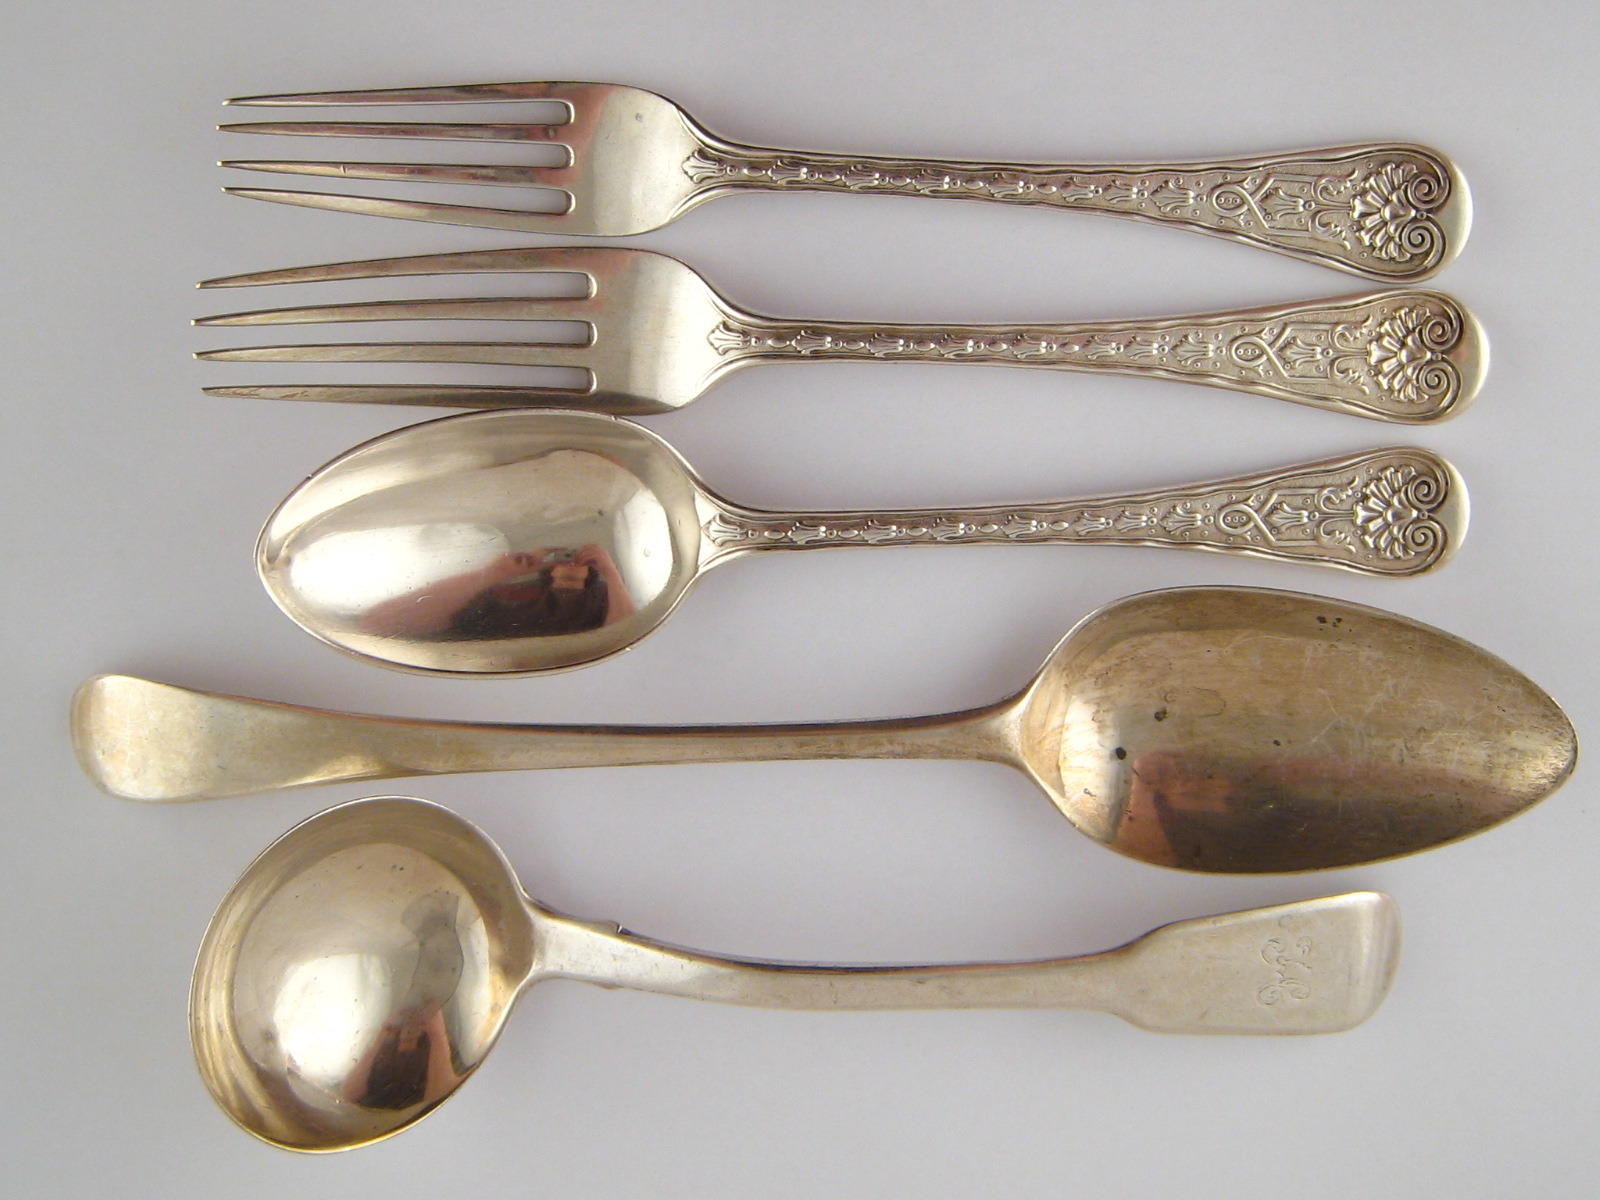 Silver.Two table forks and one dessert spoon, Elizabethan pattern, Carrington & Co. London, spoon